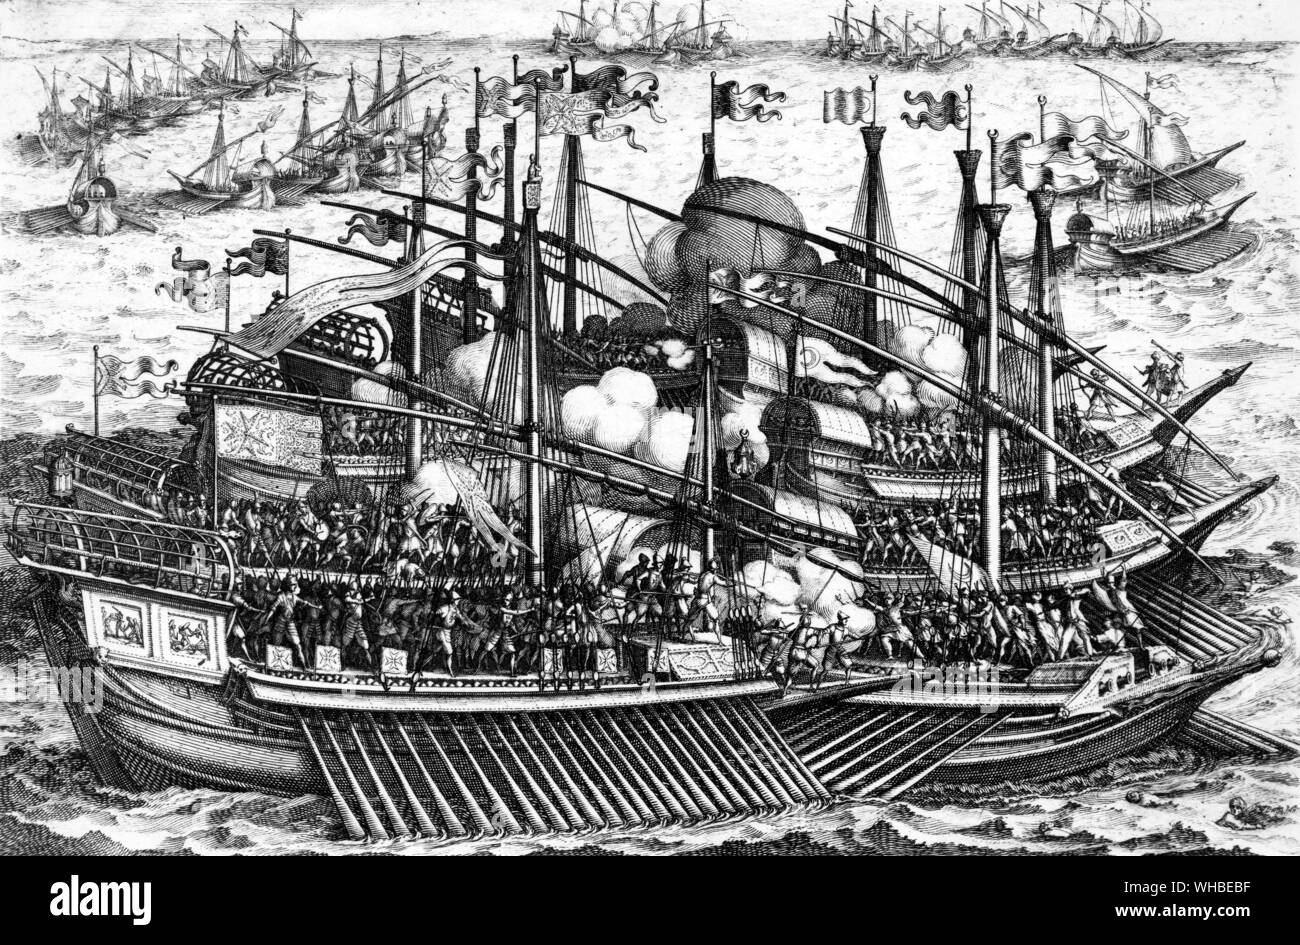 Galleon in action (first half of 17th century) 1615-19. Stock Photo